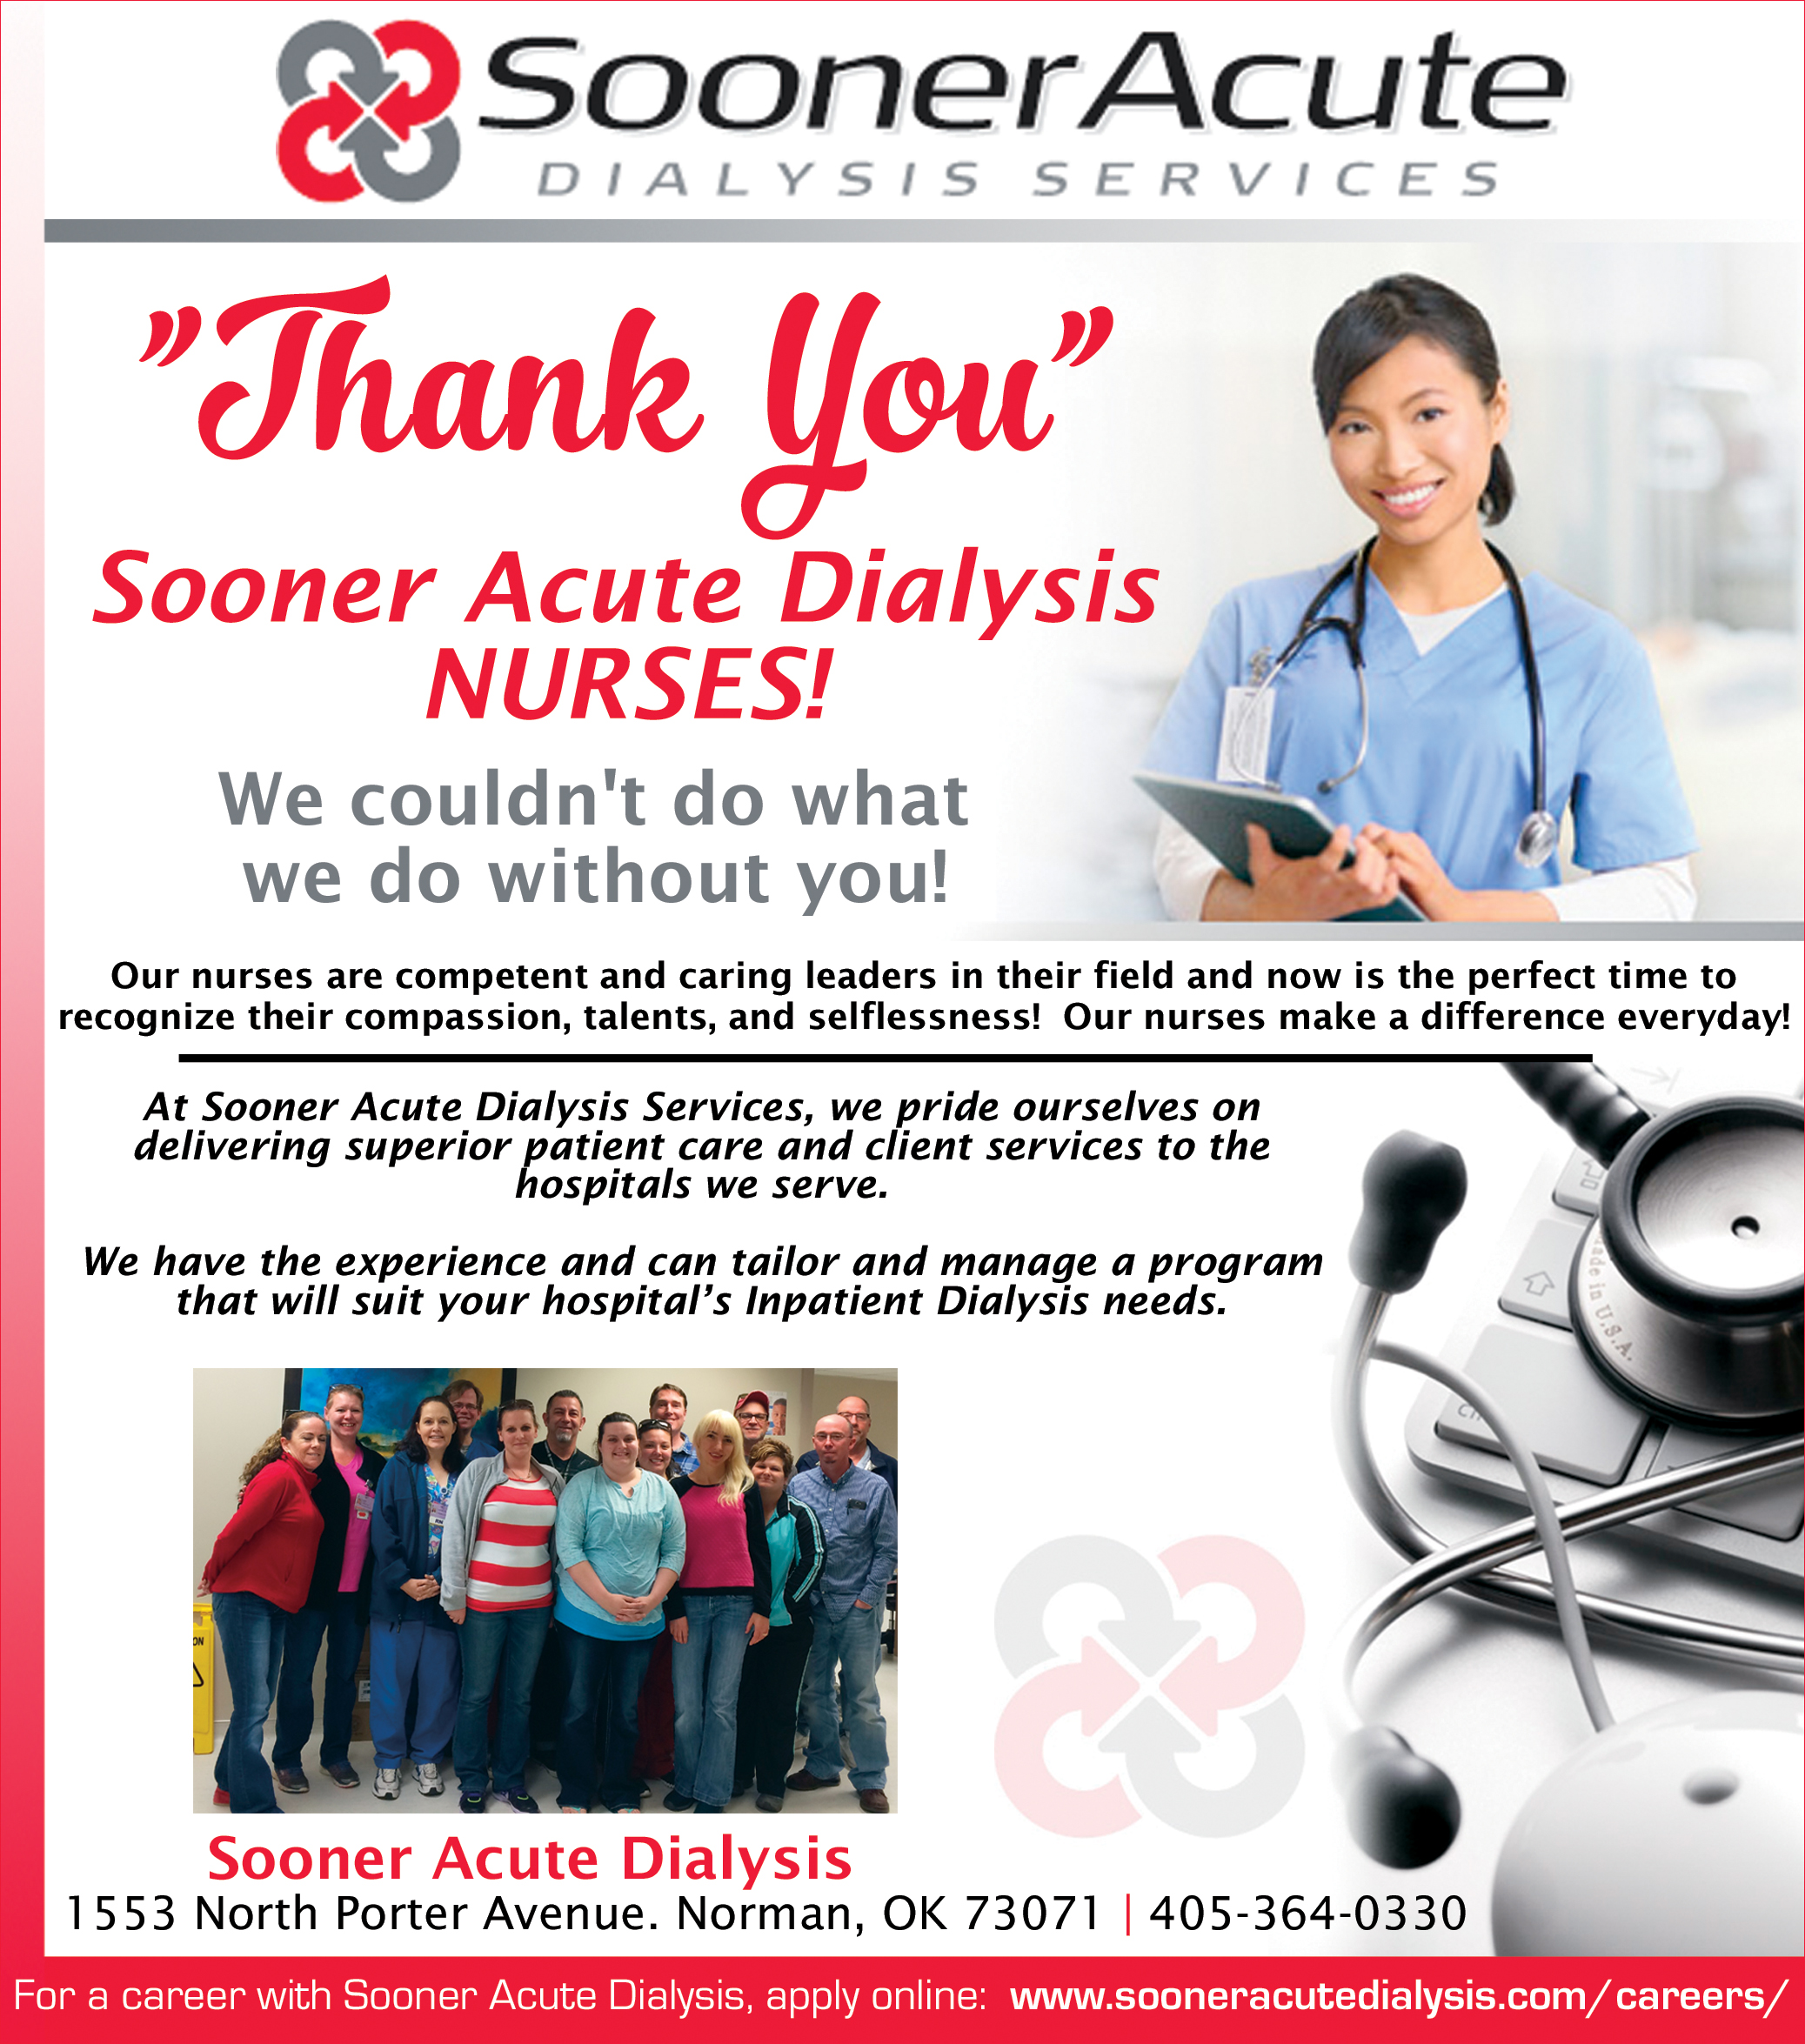 05-02-16 Sooner Acute Dialysis Services NNW